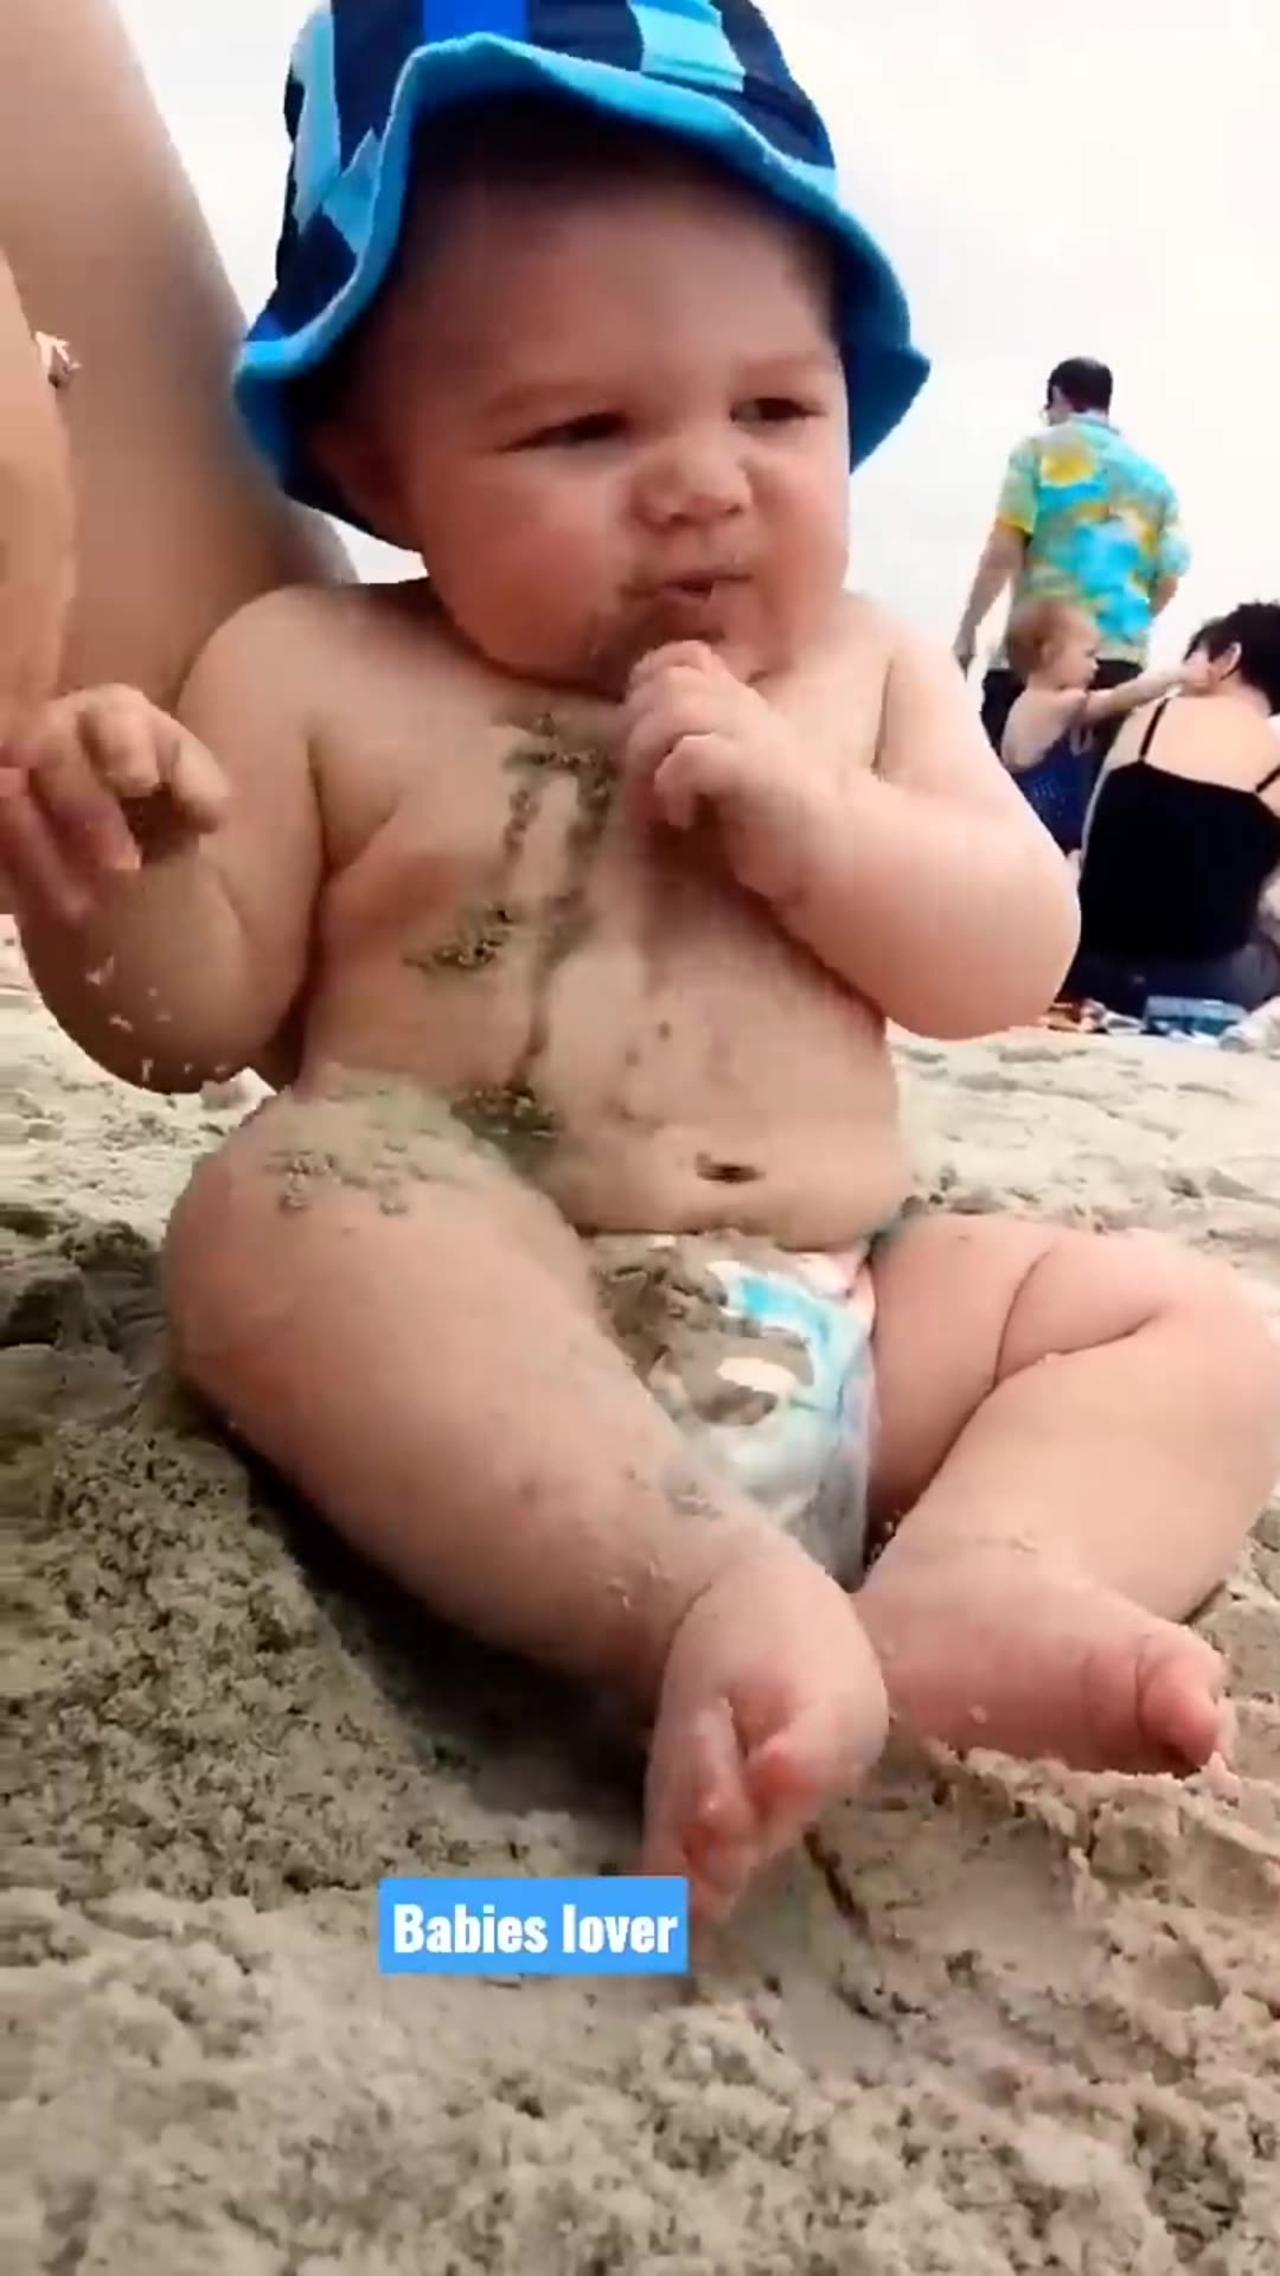 BABY FUNNY REACTION 😂🤣 ON THE BEACH 🏖️#SHORTS#VIRAL#FUNNY